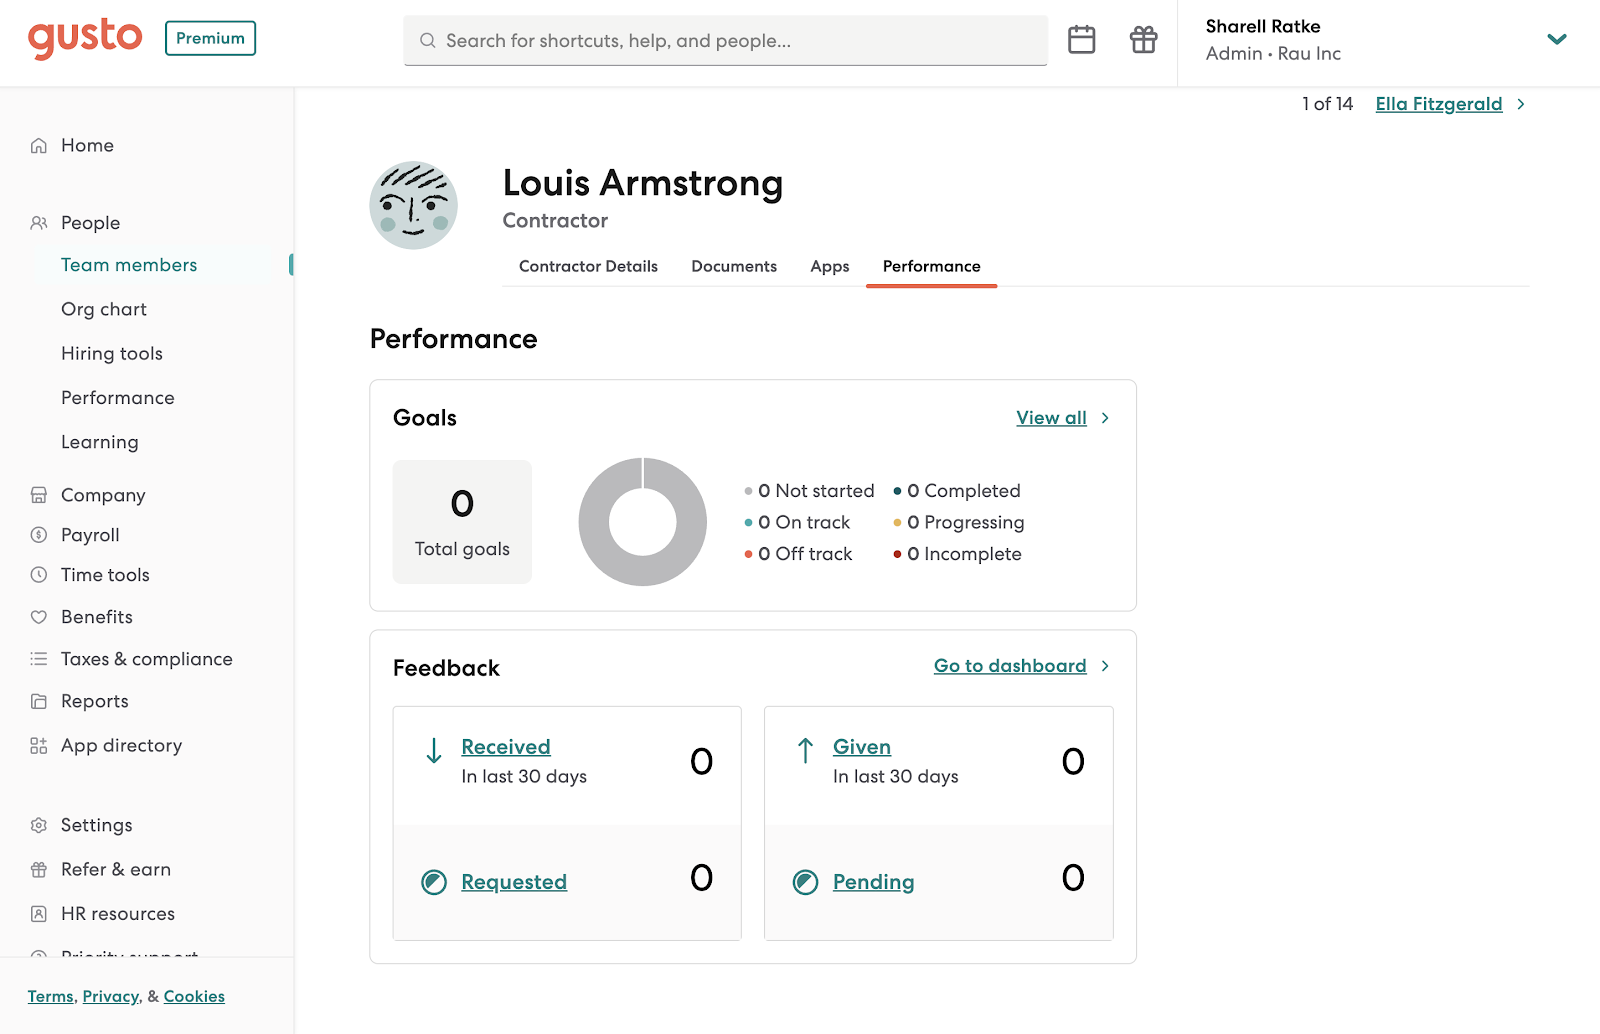 Gusto displays performance metrics in a contractor’s online profile, including a circle graph of goal progress and the amount of feedback received, given, requested, and pending.